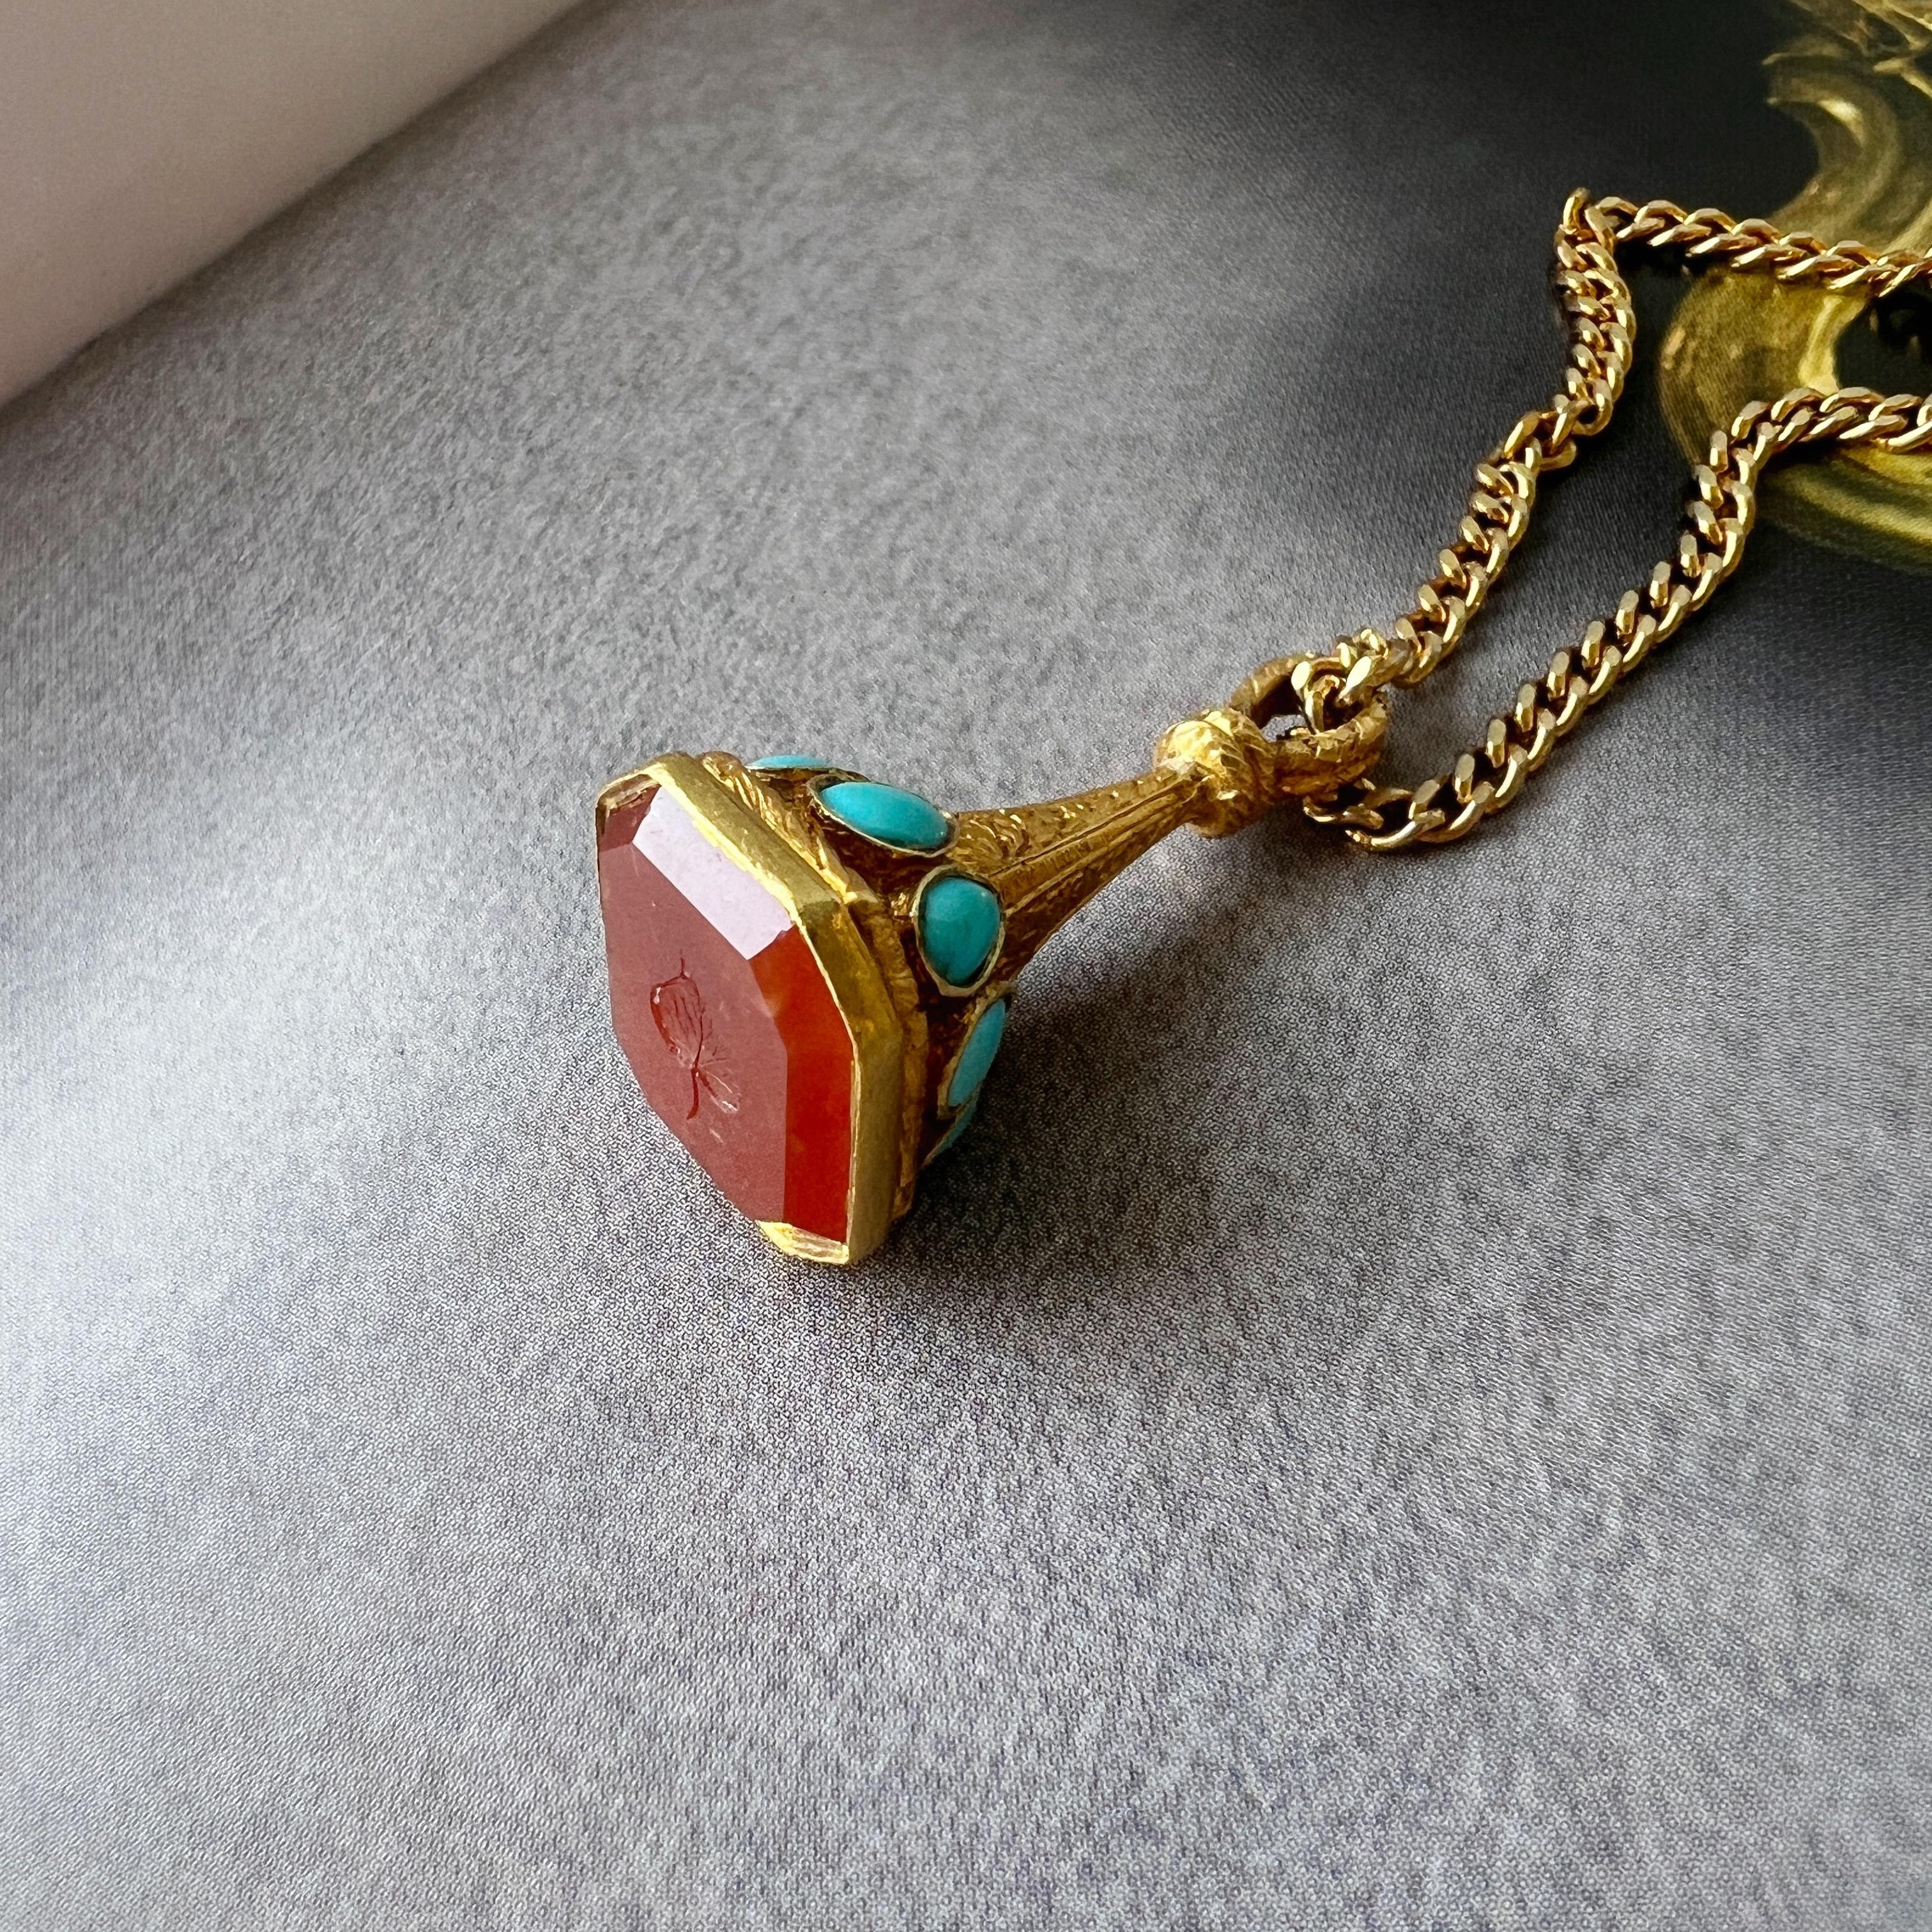 Antique 18K gold turquoise carnelian seal fob pendant “as free as a leaf” 5